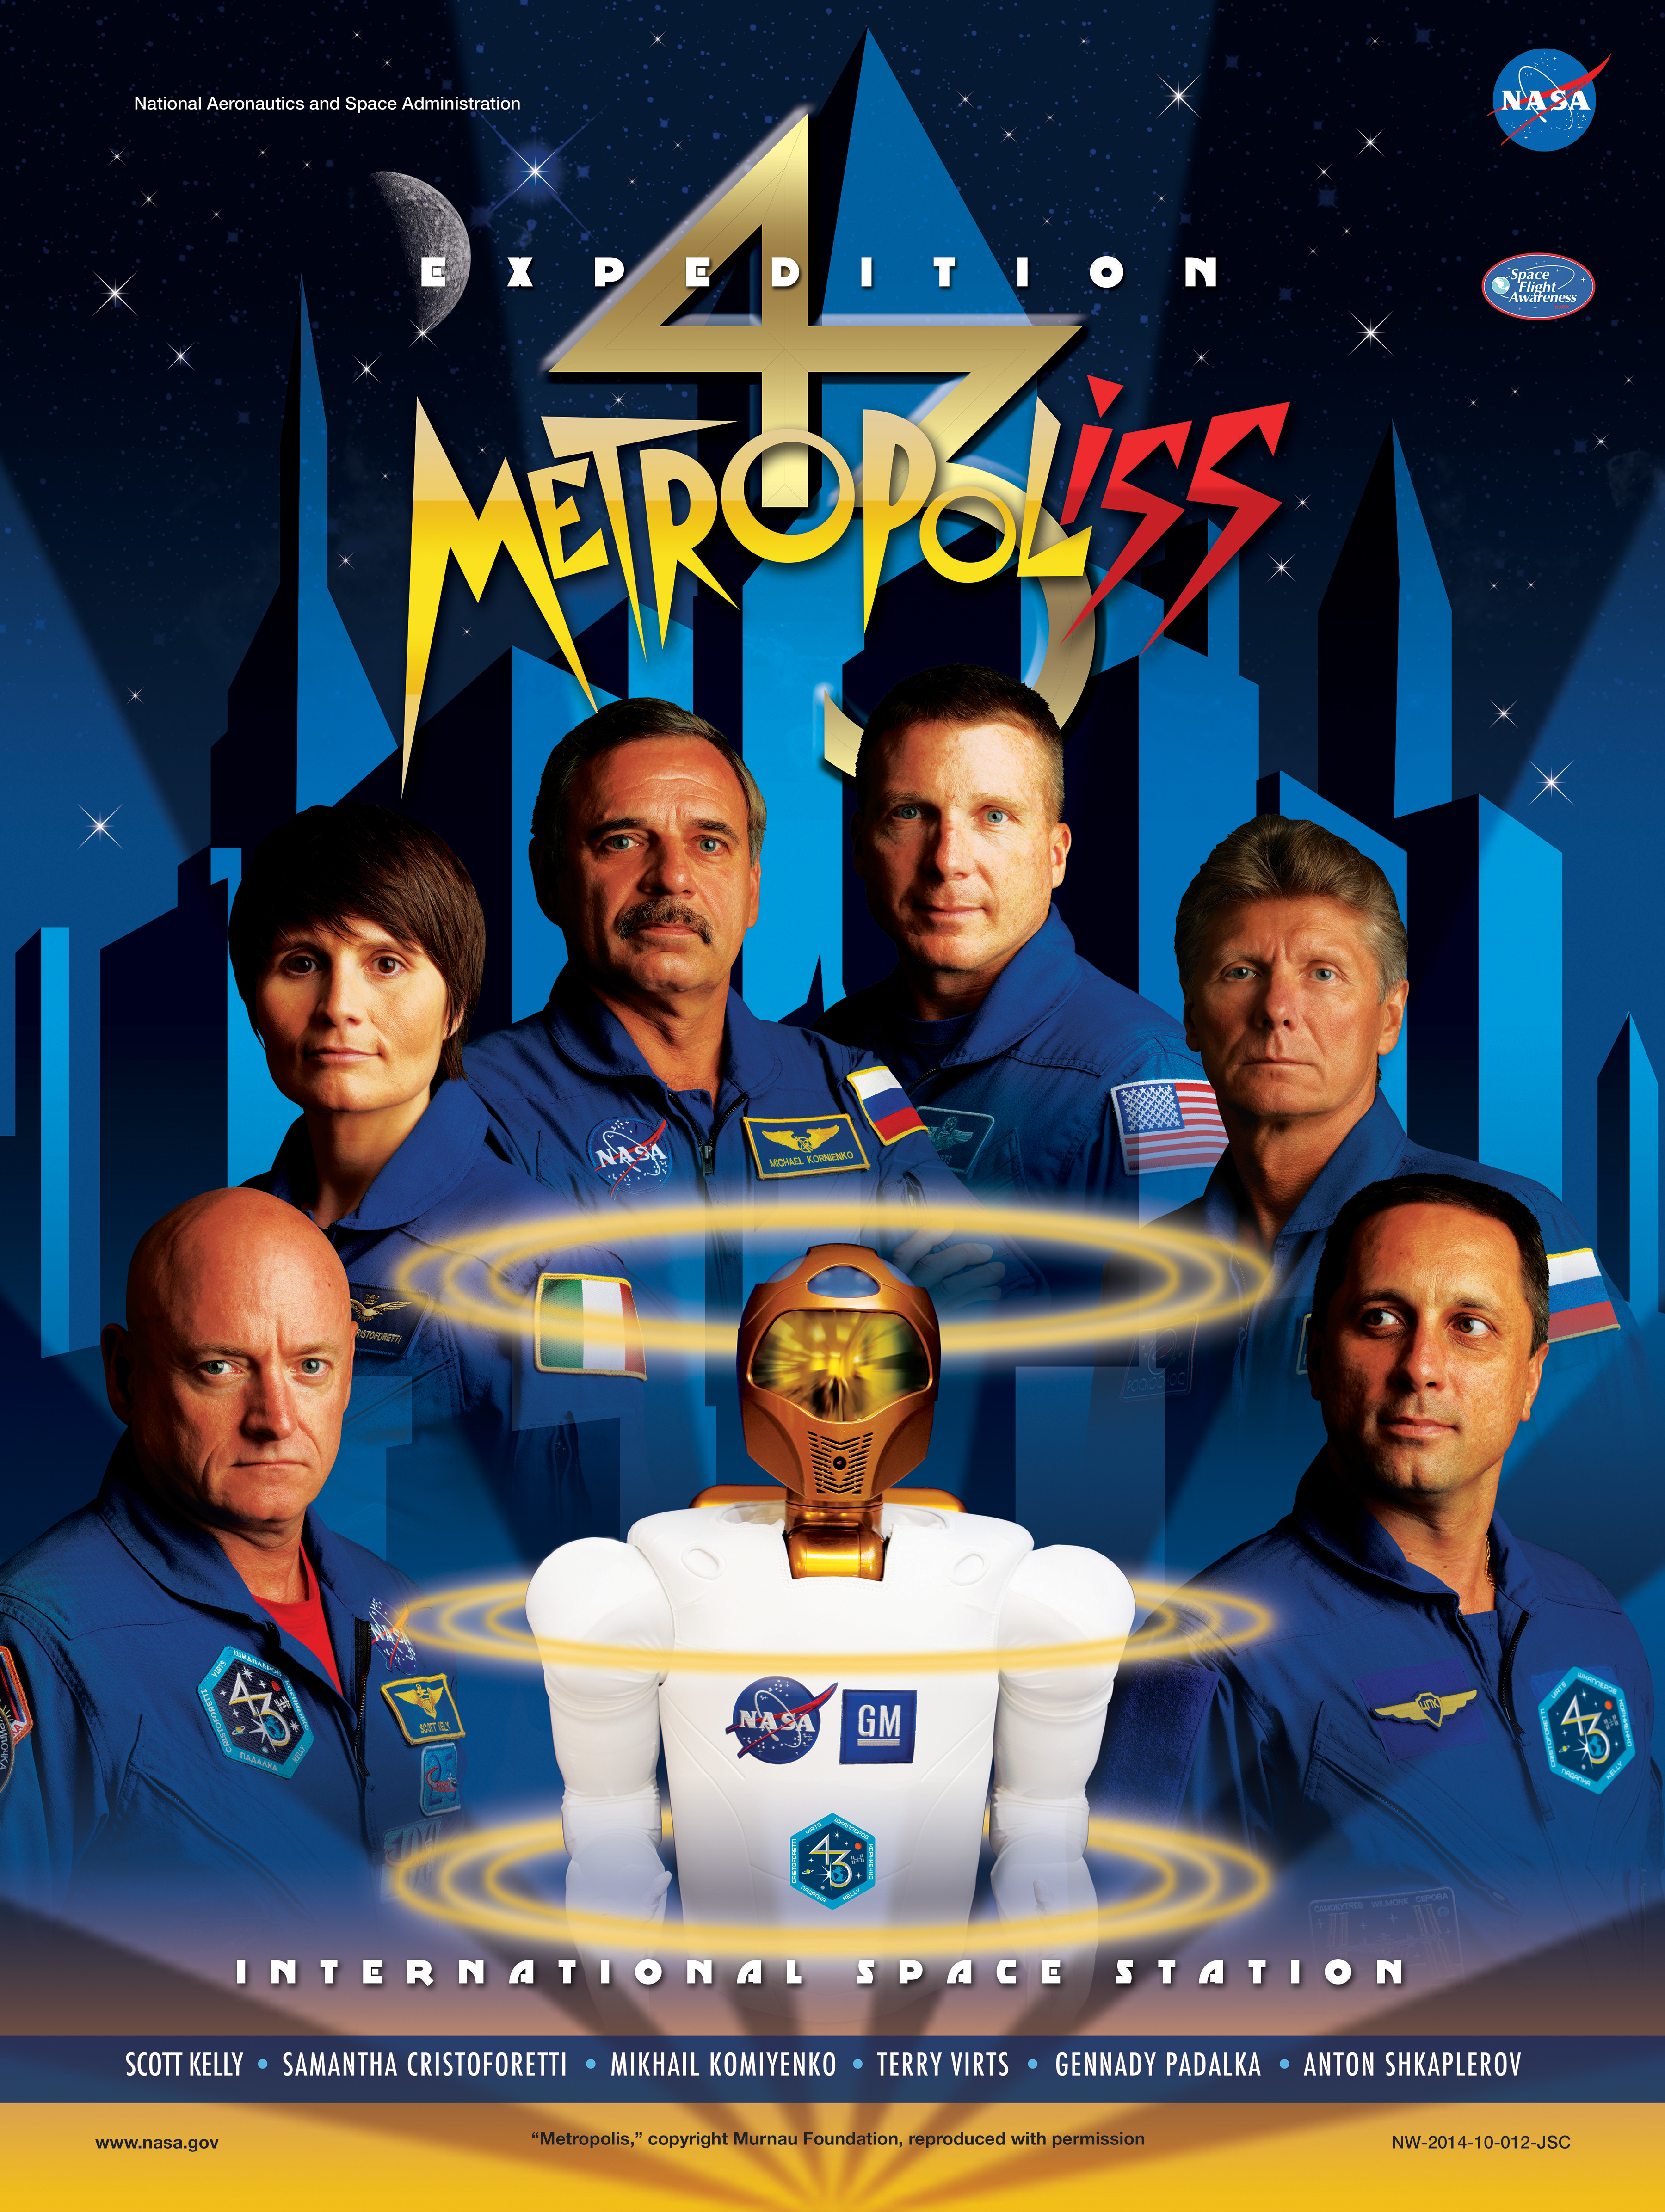 Expedition 43 'METROPOLISS' crew poster